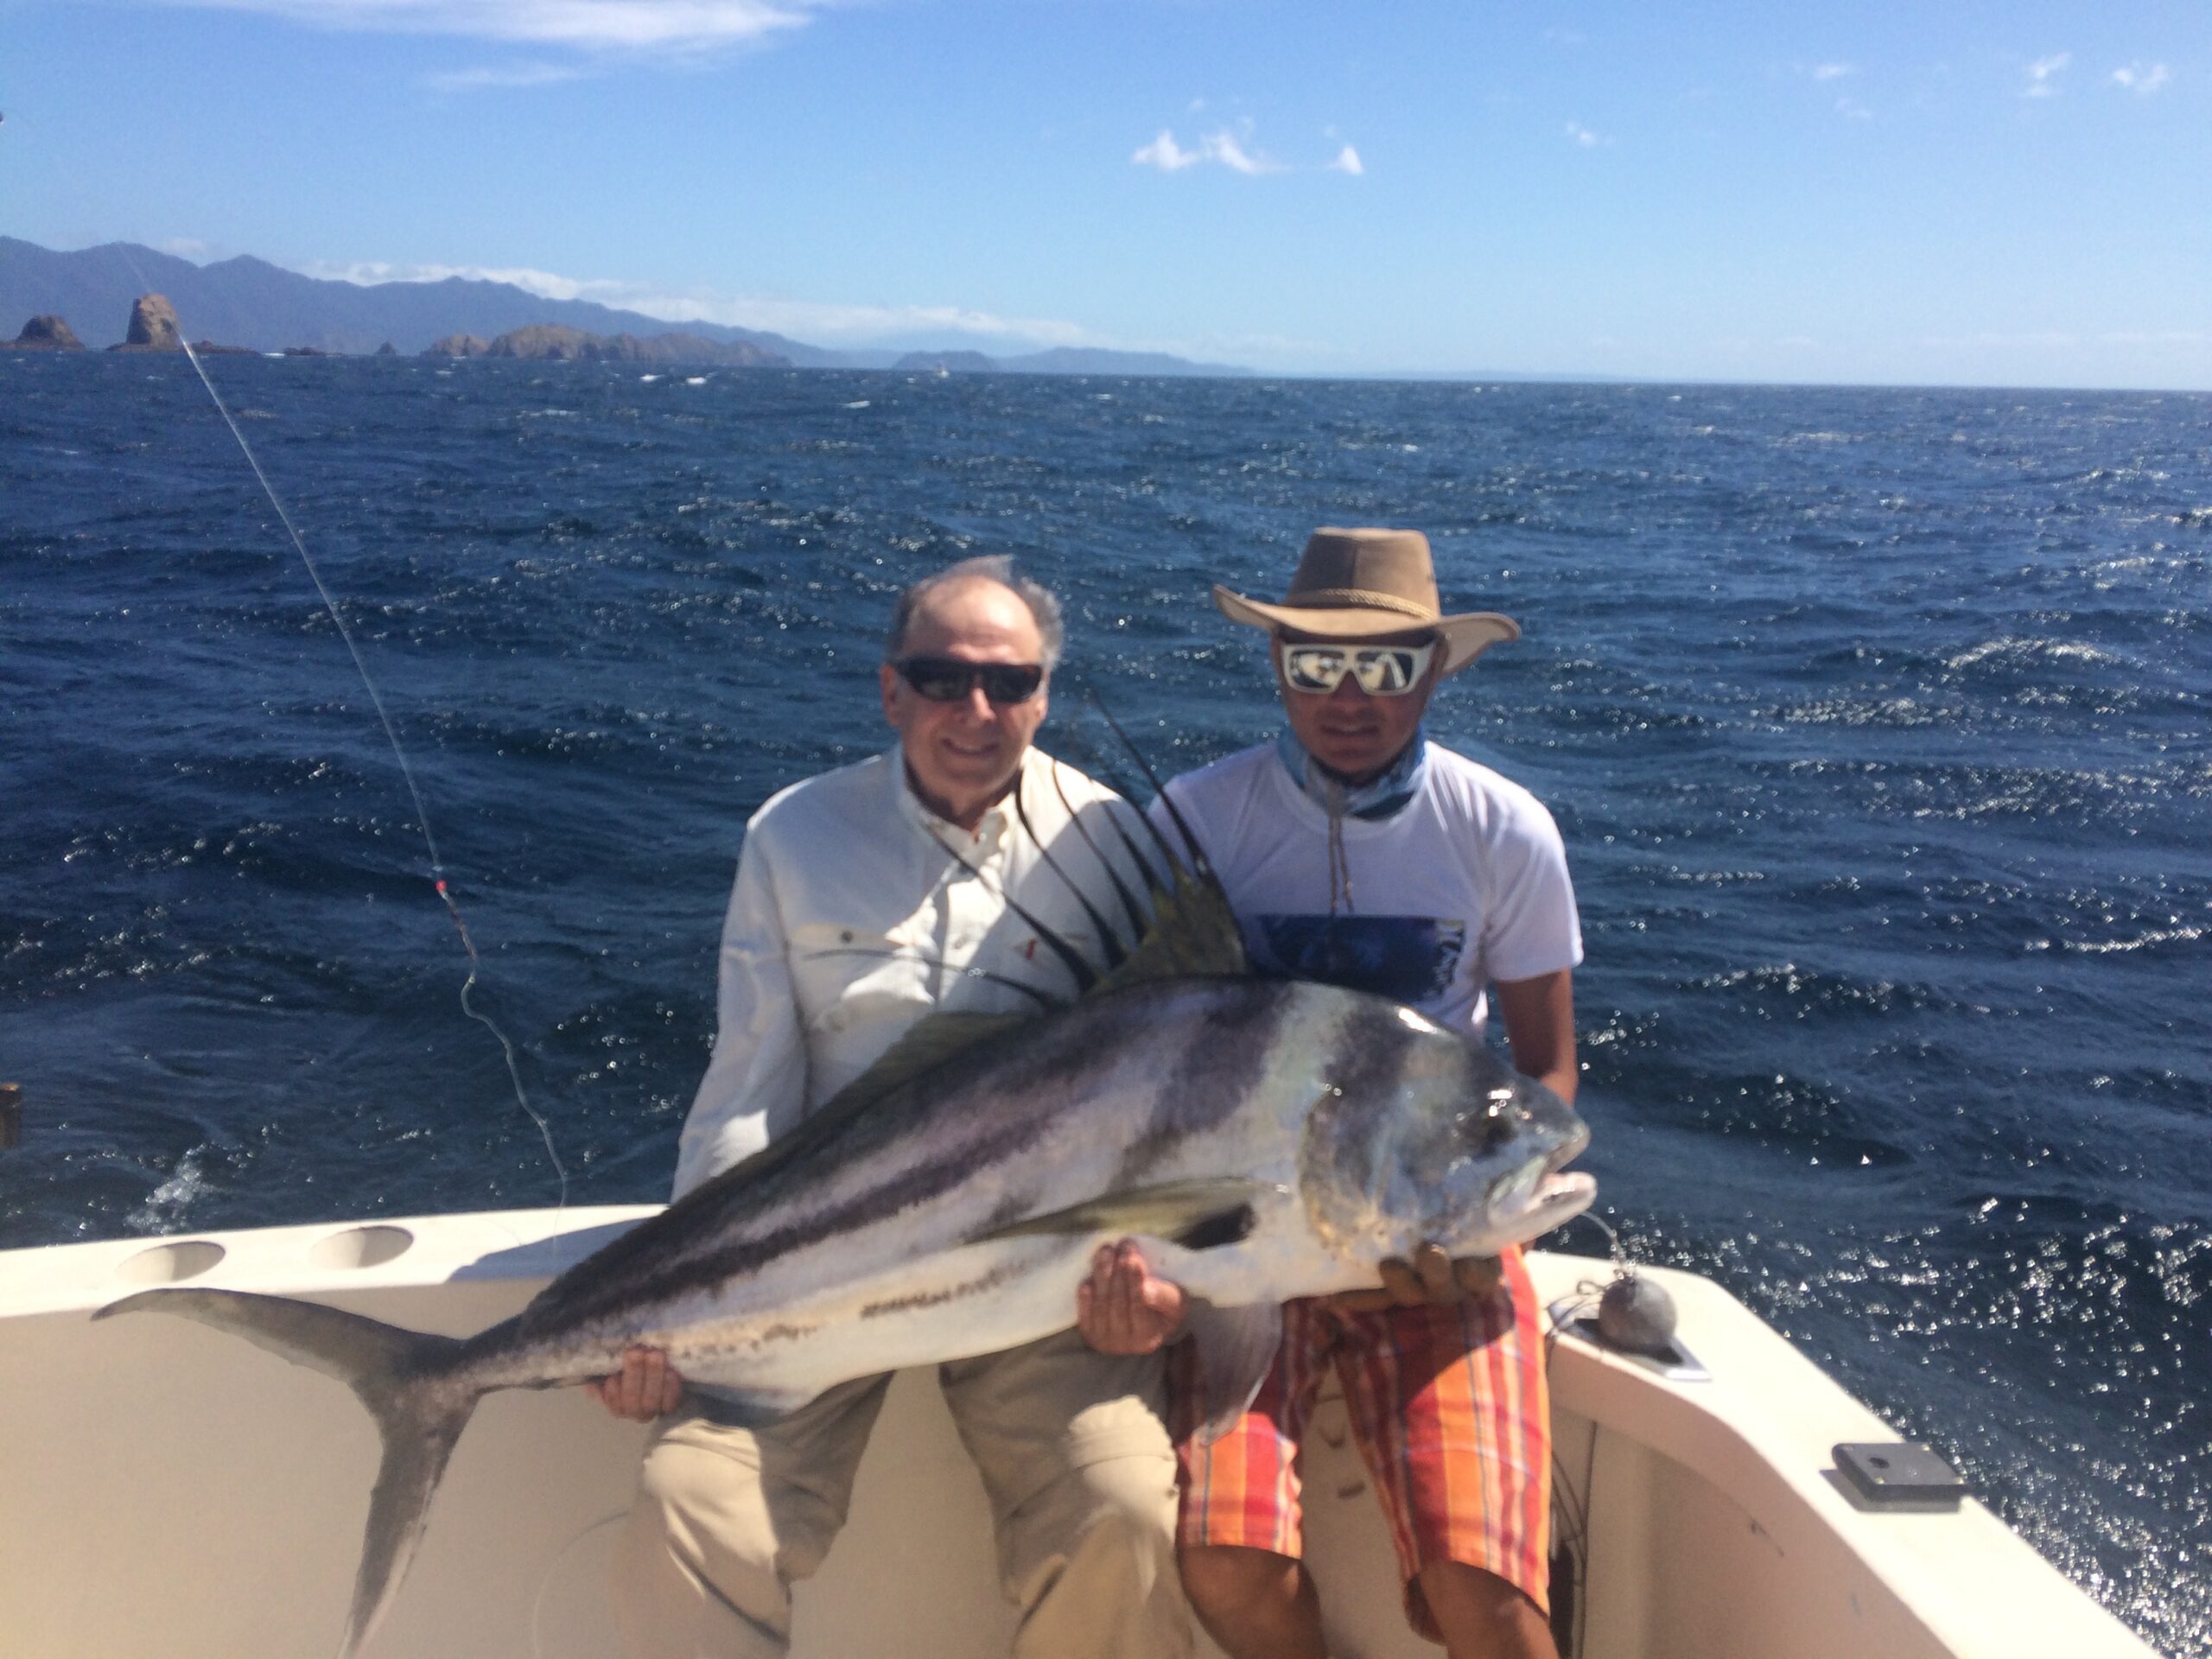 Catch a rooster fish like this on a Costa Rica Fishing Charter!